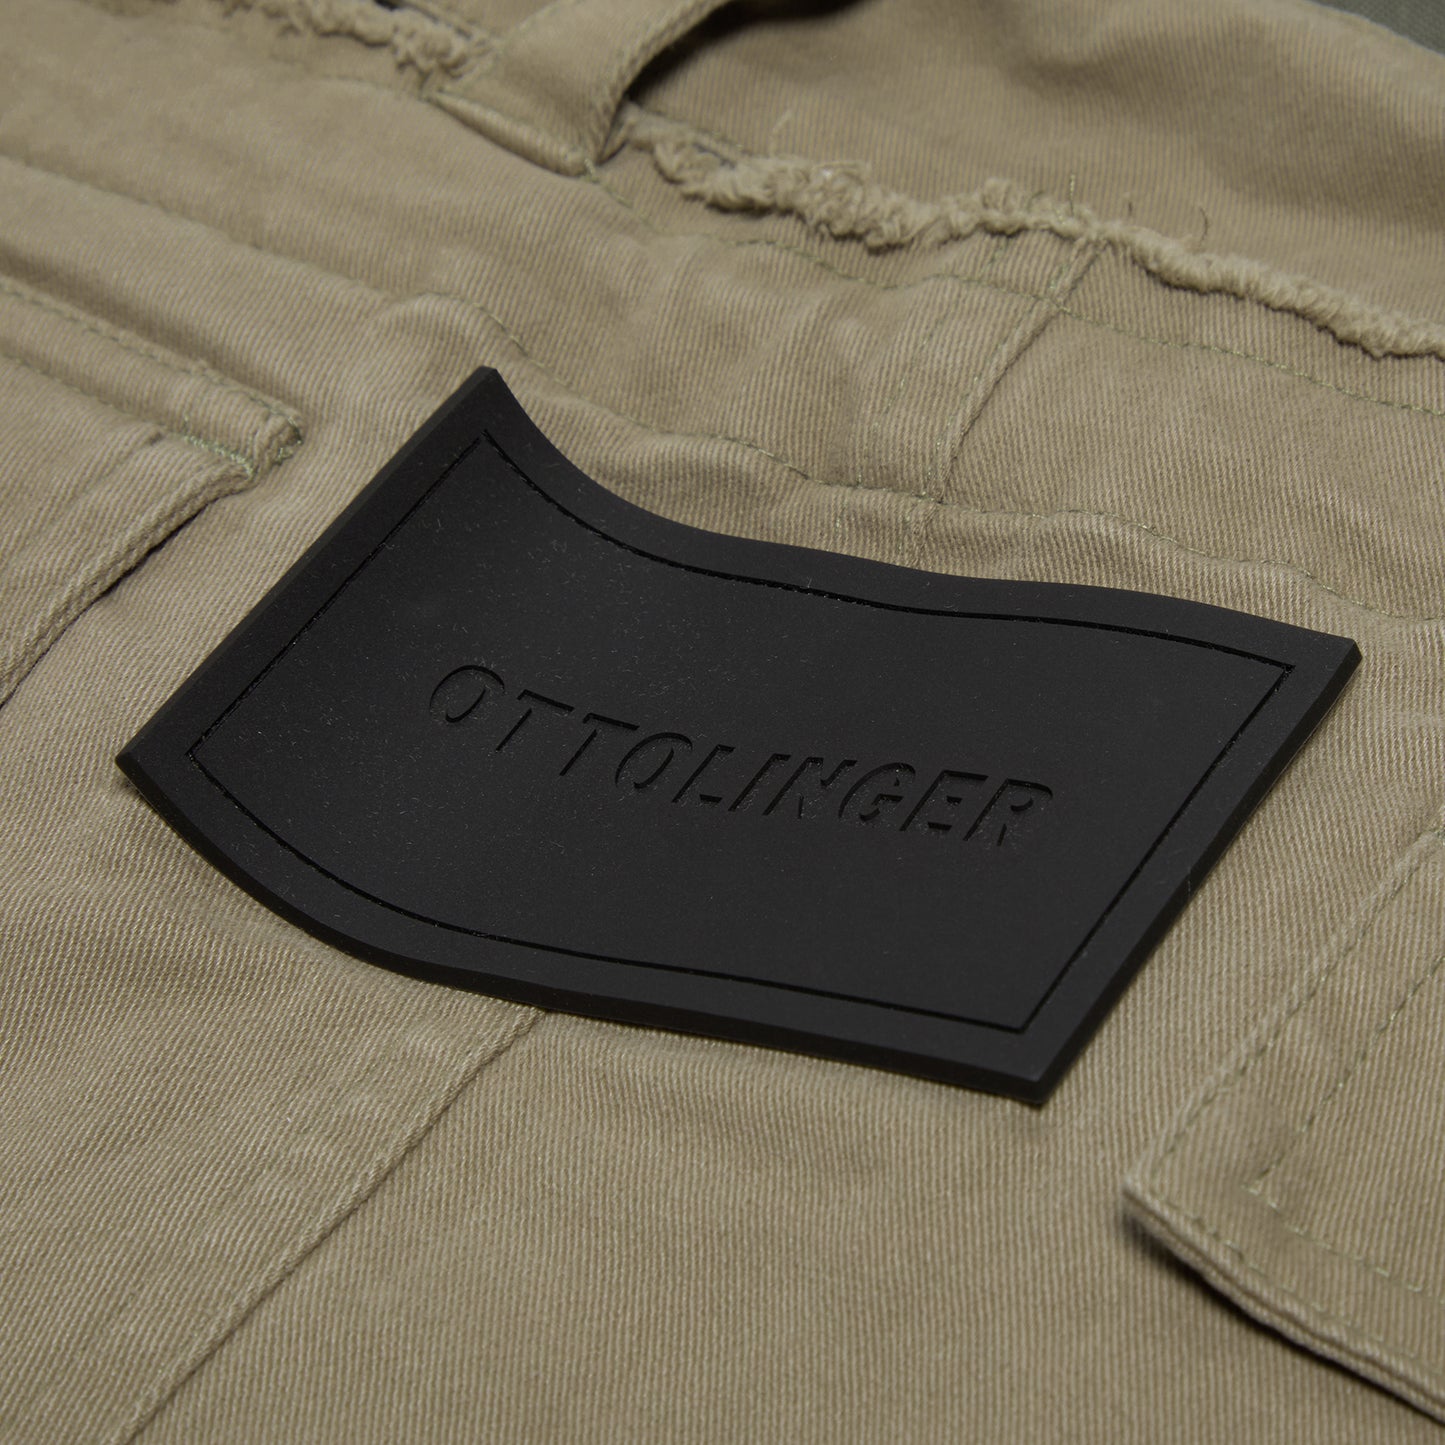 Ottolinger Woven Baggy Cargo Pants (Olive Grey)